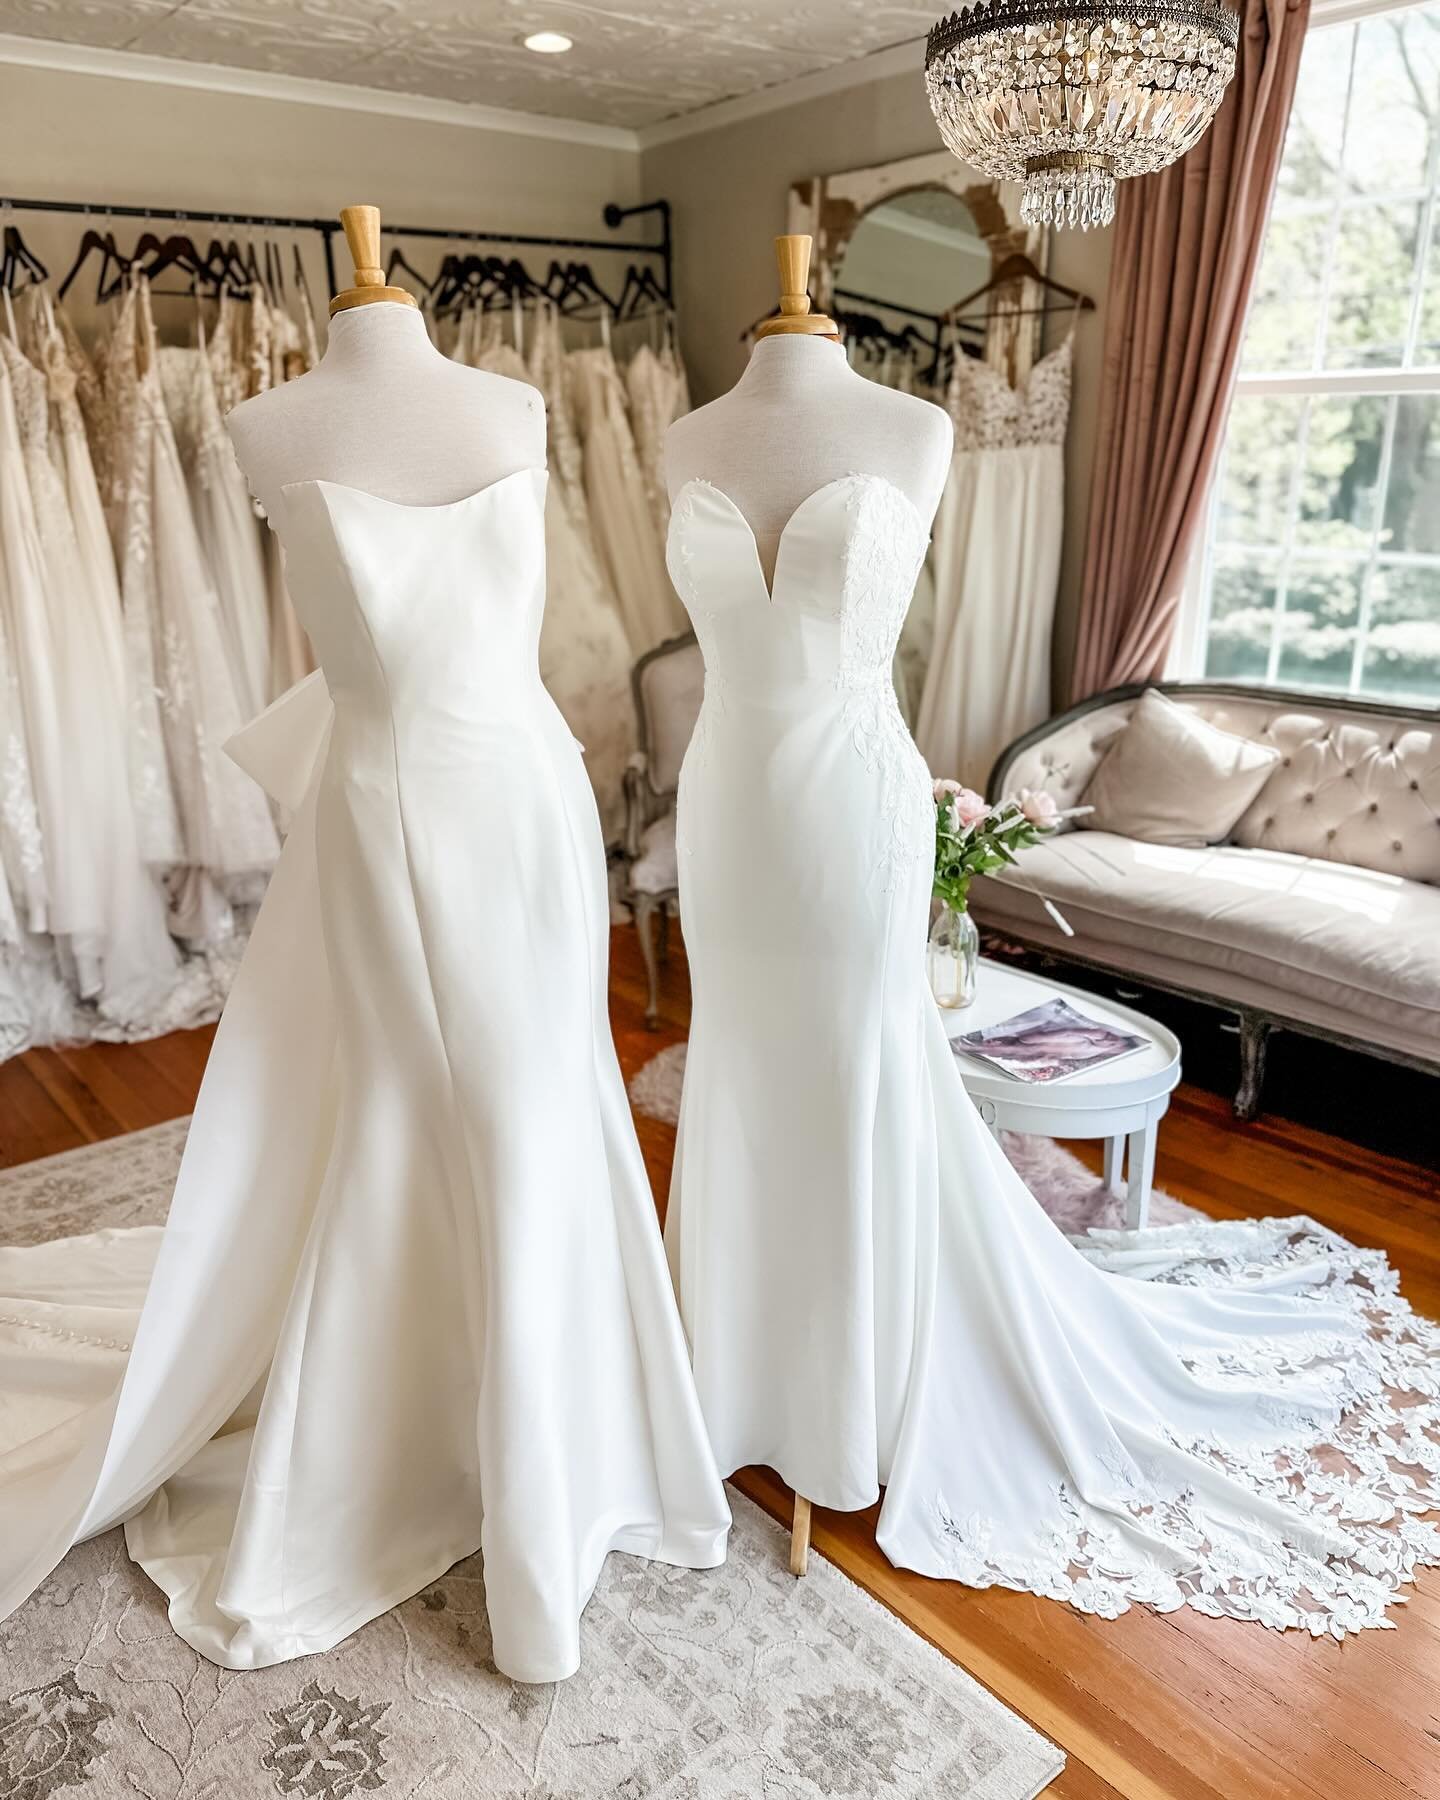 We 🤍 our new dresses!! We are so excited to see our brides try on our new styles that we get in monthly. Make your appointment today to try on these new beauties! 
&bull;
&bull;
&bull;
&bull;
#modernvintagebridal #capecod #capecodbride #lillianbride